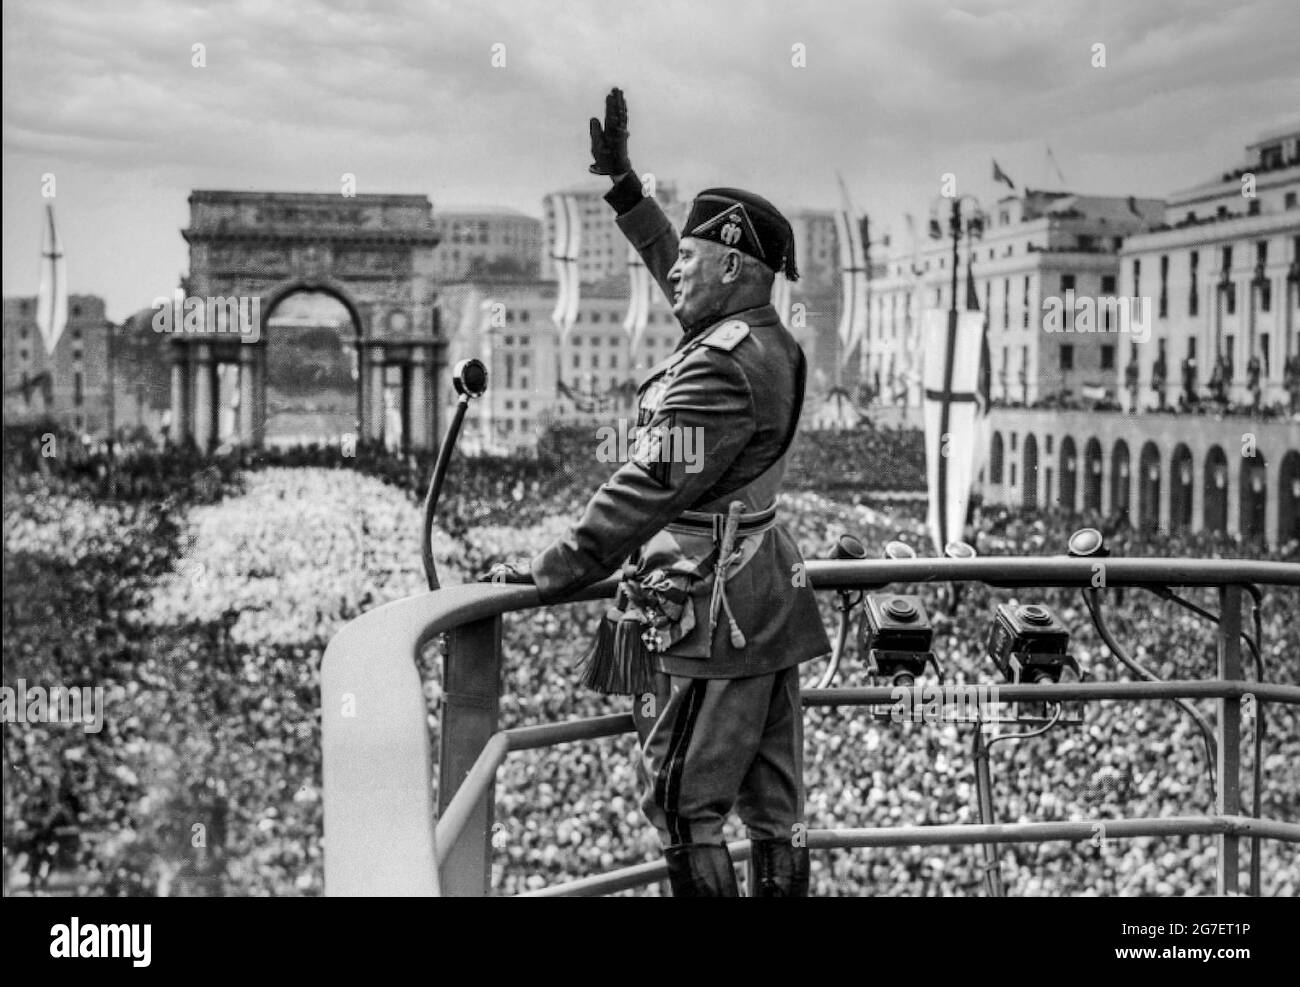 MUSSOLINI SPEECH 1930s IL DULCE ROME ITALY SPEECH FACIST SALUTE Italian fascist dictator Benito Mussolini at the height of his popularity, in military uniform with microphone making a speech on raised podium, facist saluting salute to ecstatic Italian crowds in Rome Italy in the 1930s. Stock Photo